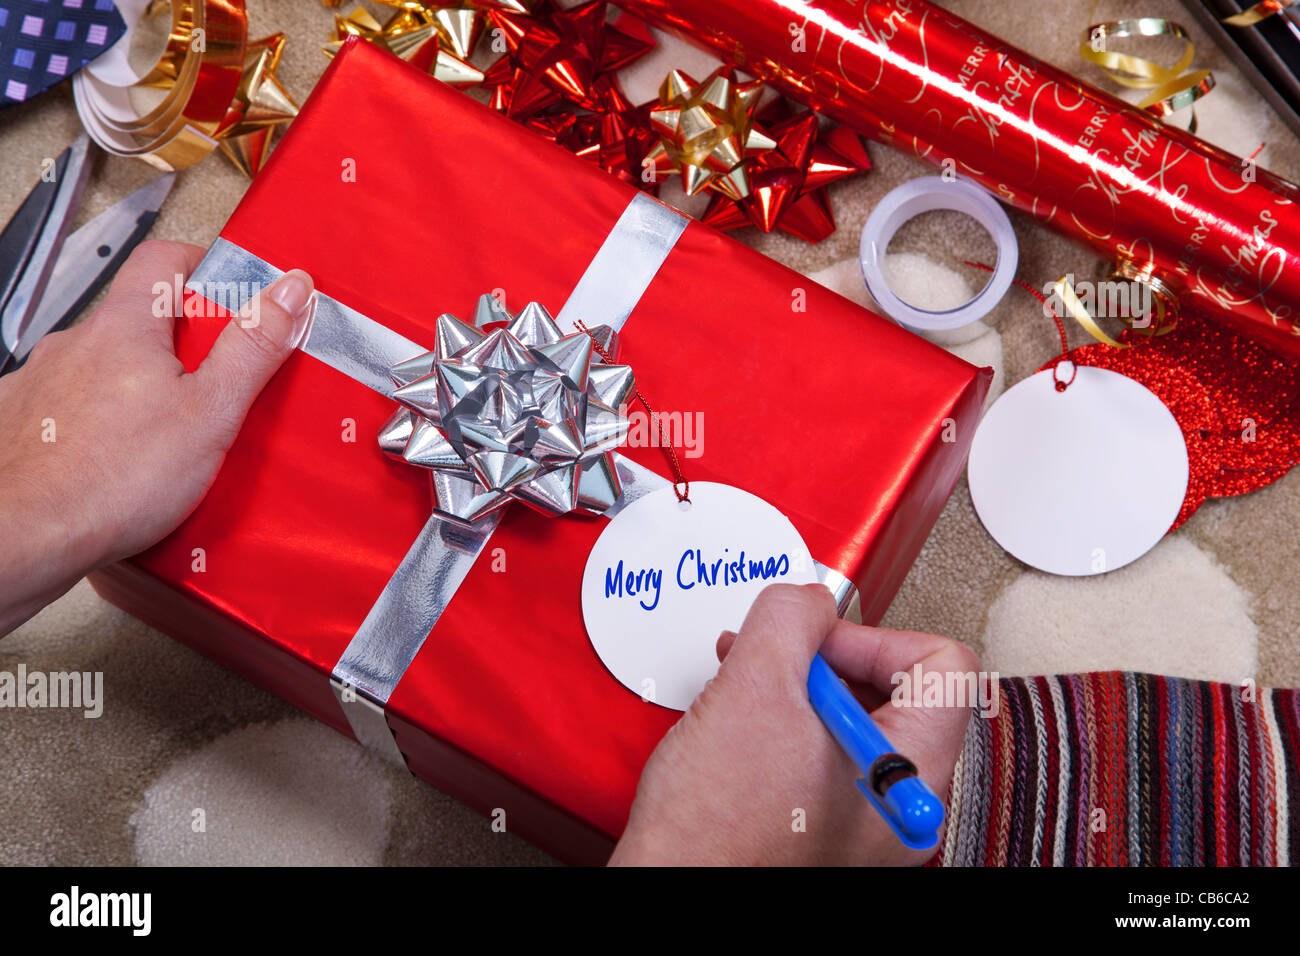 Photo of a woman writing Merry Christmas on a gift tag on a red present with silver ribbon and bow. Stock Photo